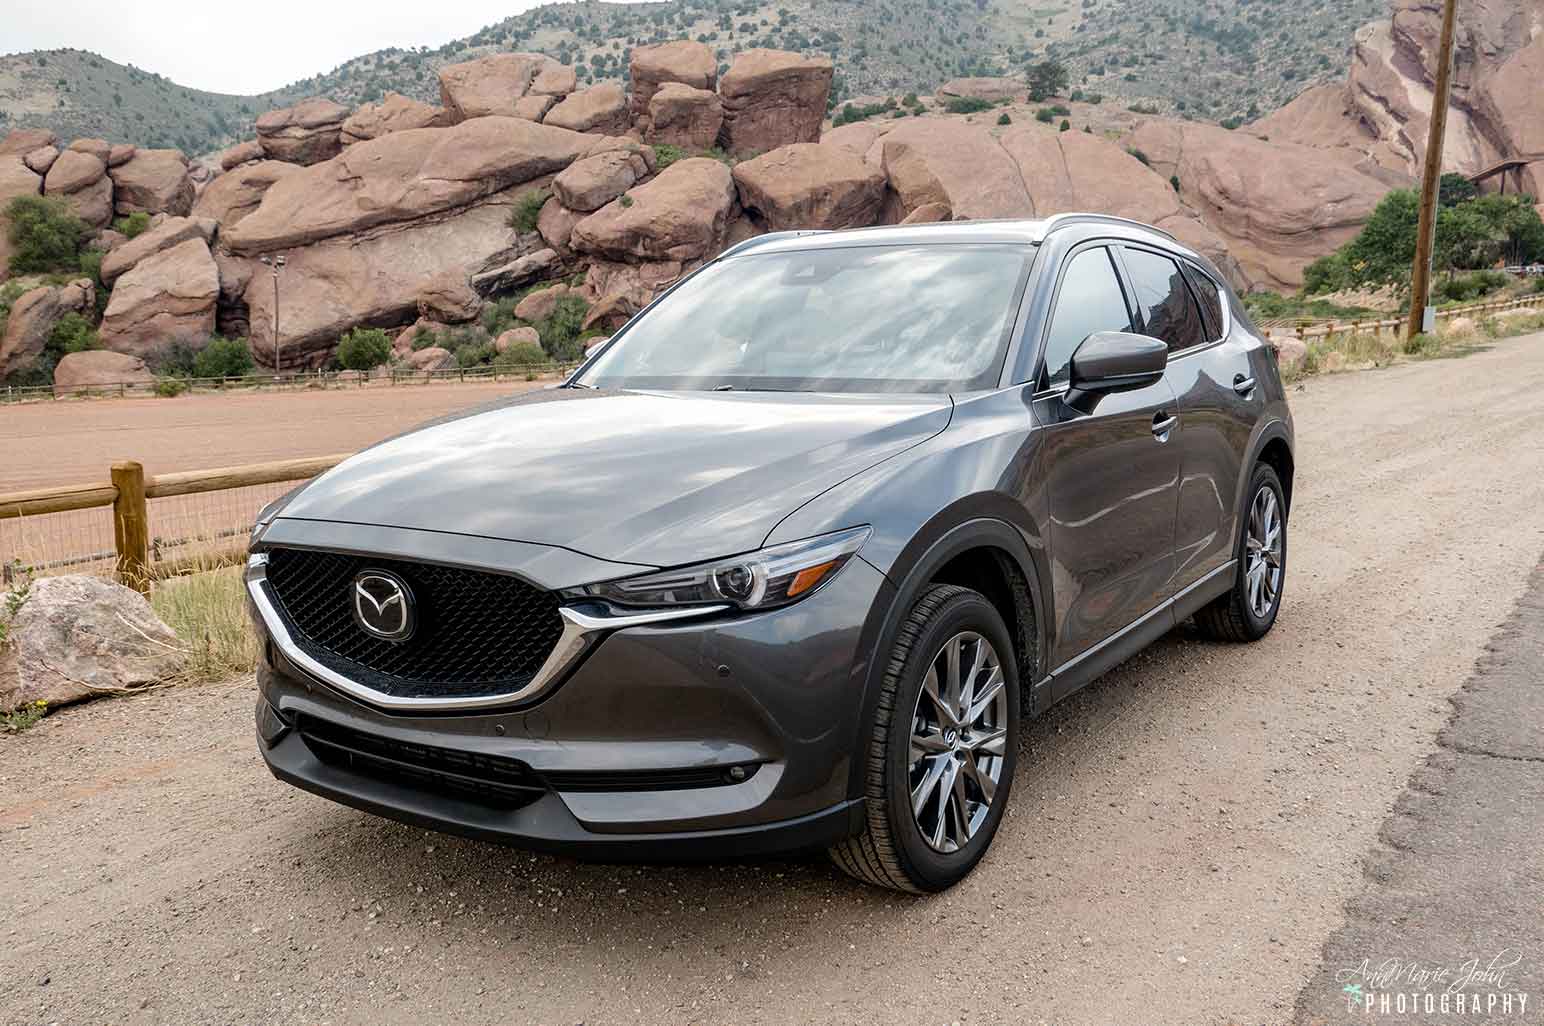 Best kid-friendly activities in Denver and a review of the Mazda CX-5 Signature AWD.